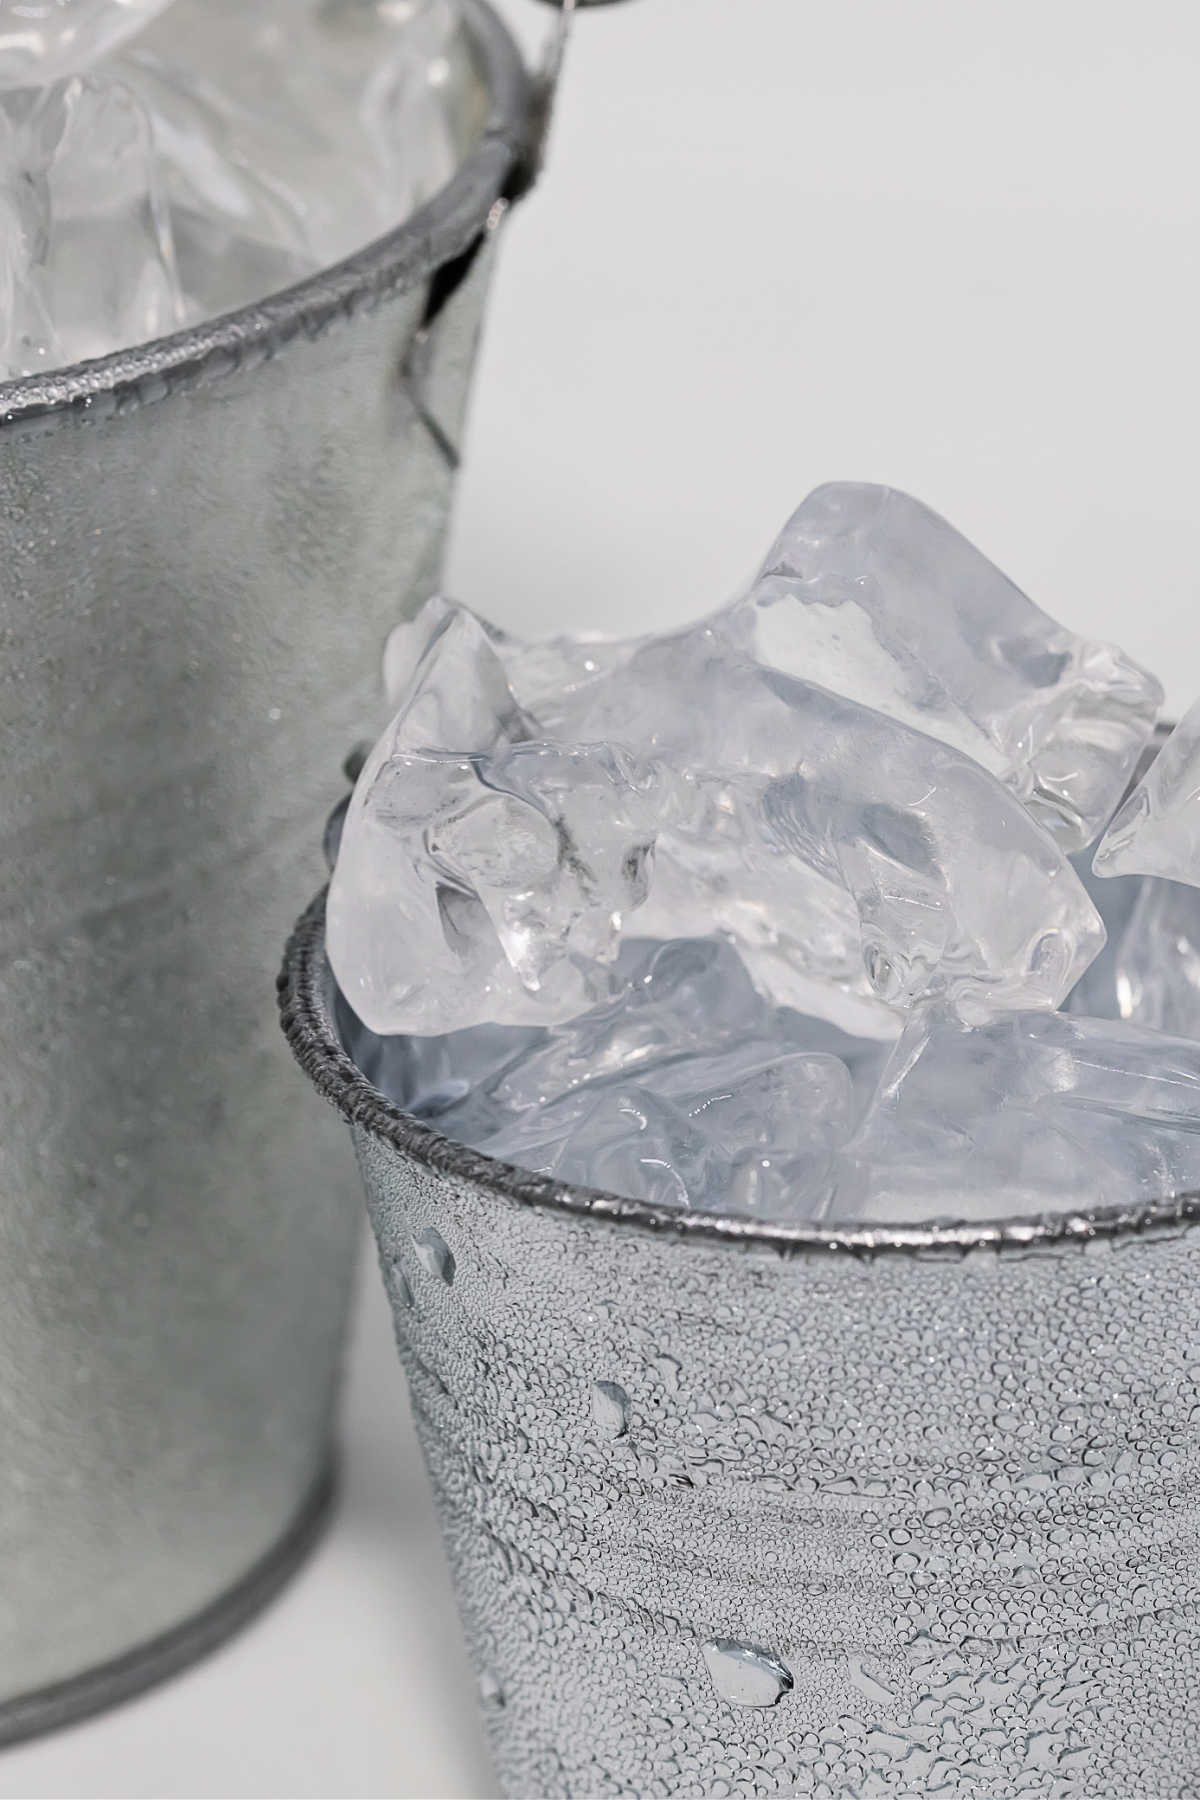 A vertical image of a small metal bucke filled with ice next to a larger bucket of ice.